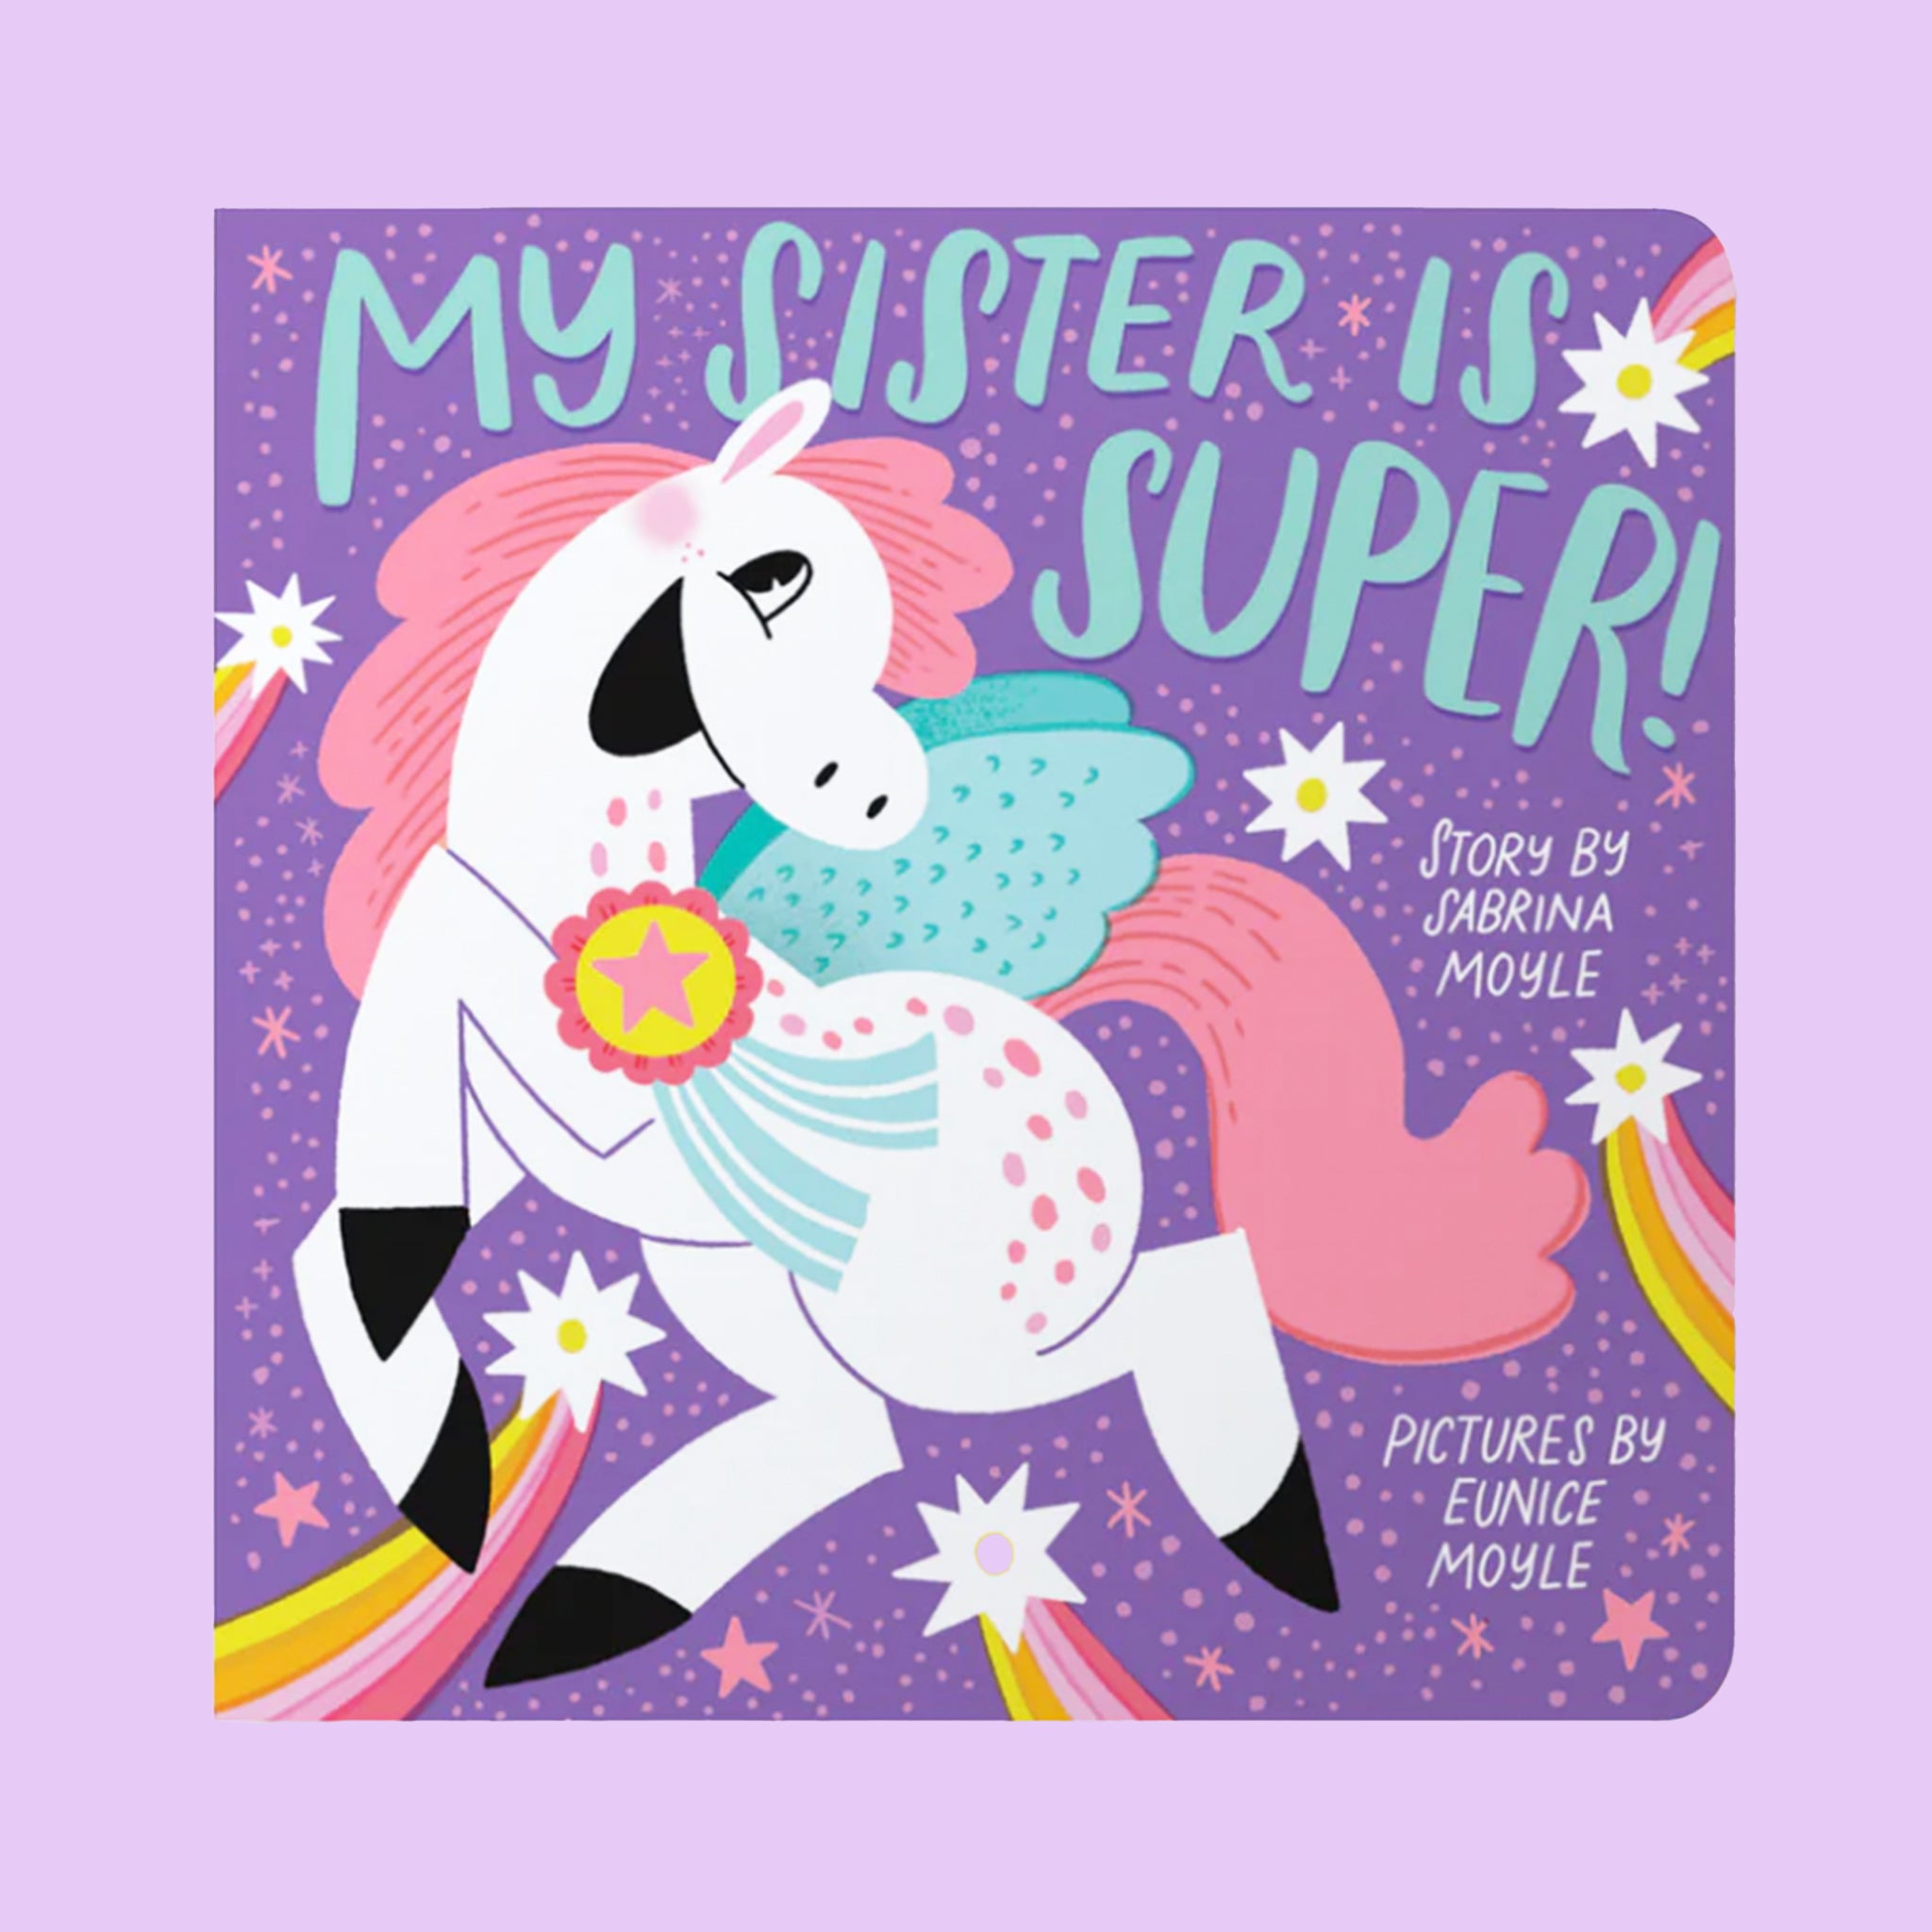 On a purple background is a purple book with an illustration of a unicorn and the title that reads, &quot;My Sister Is Super!&quot;. 